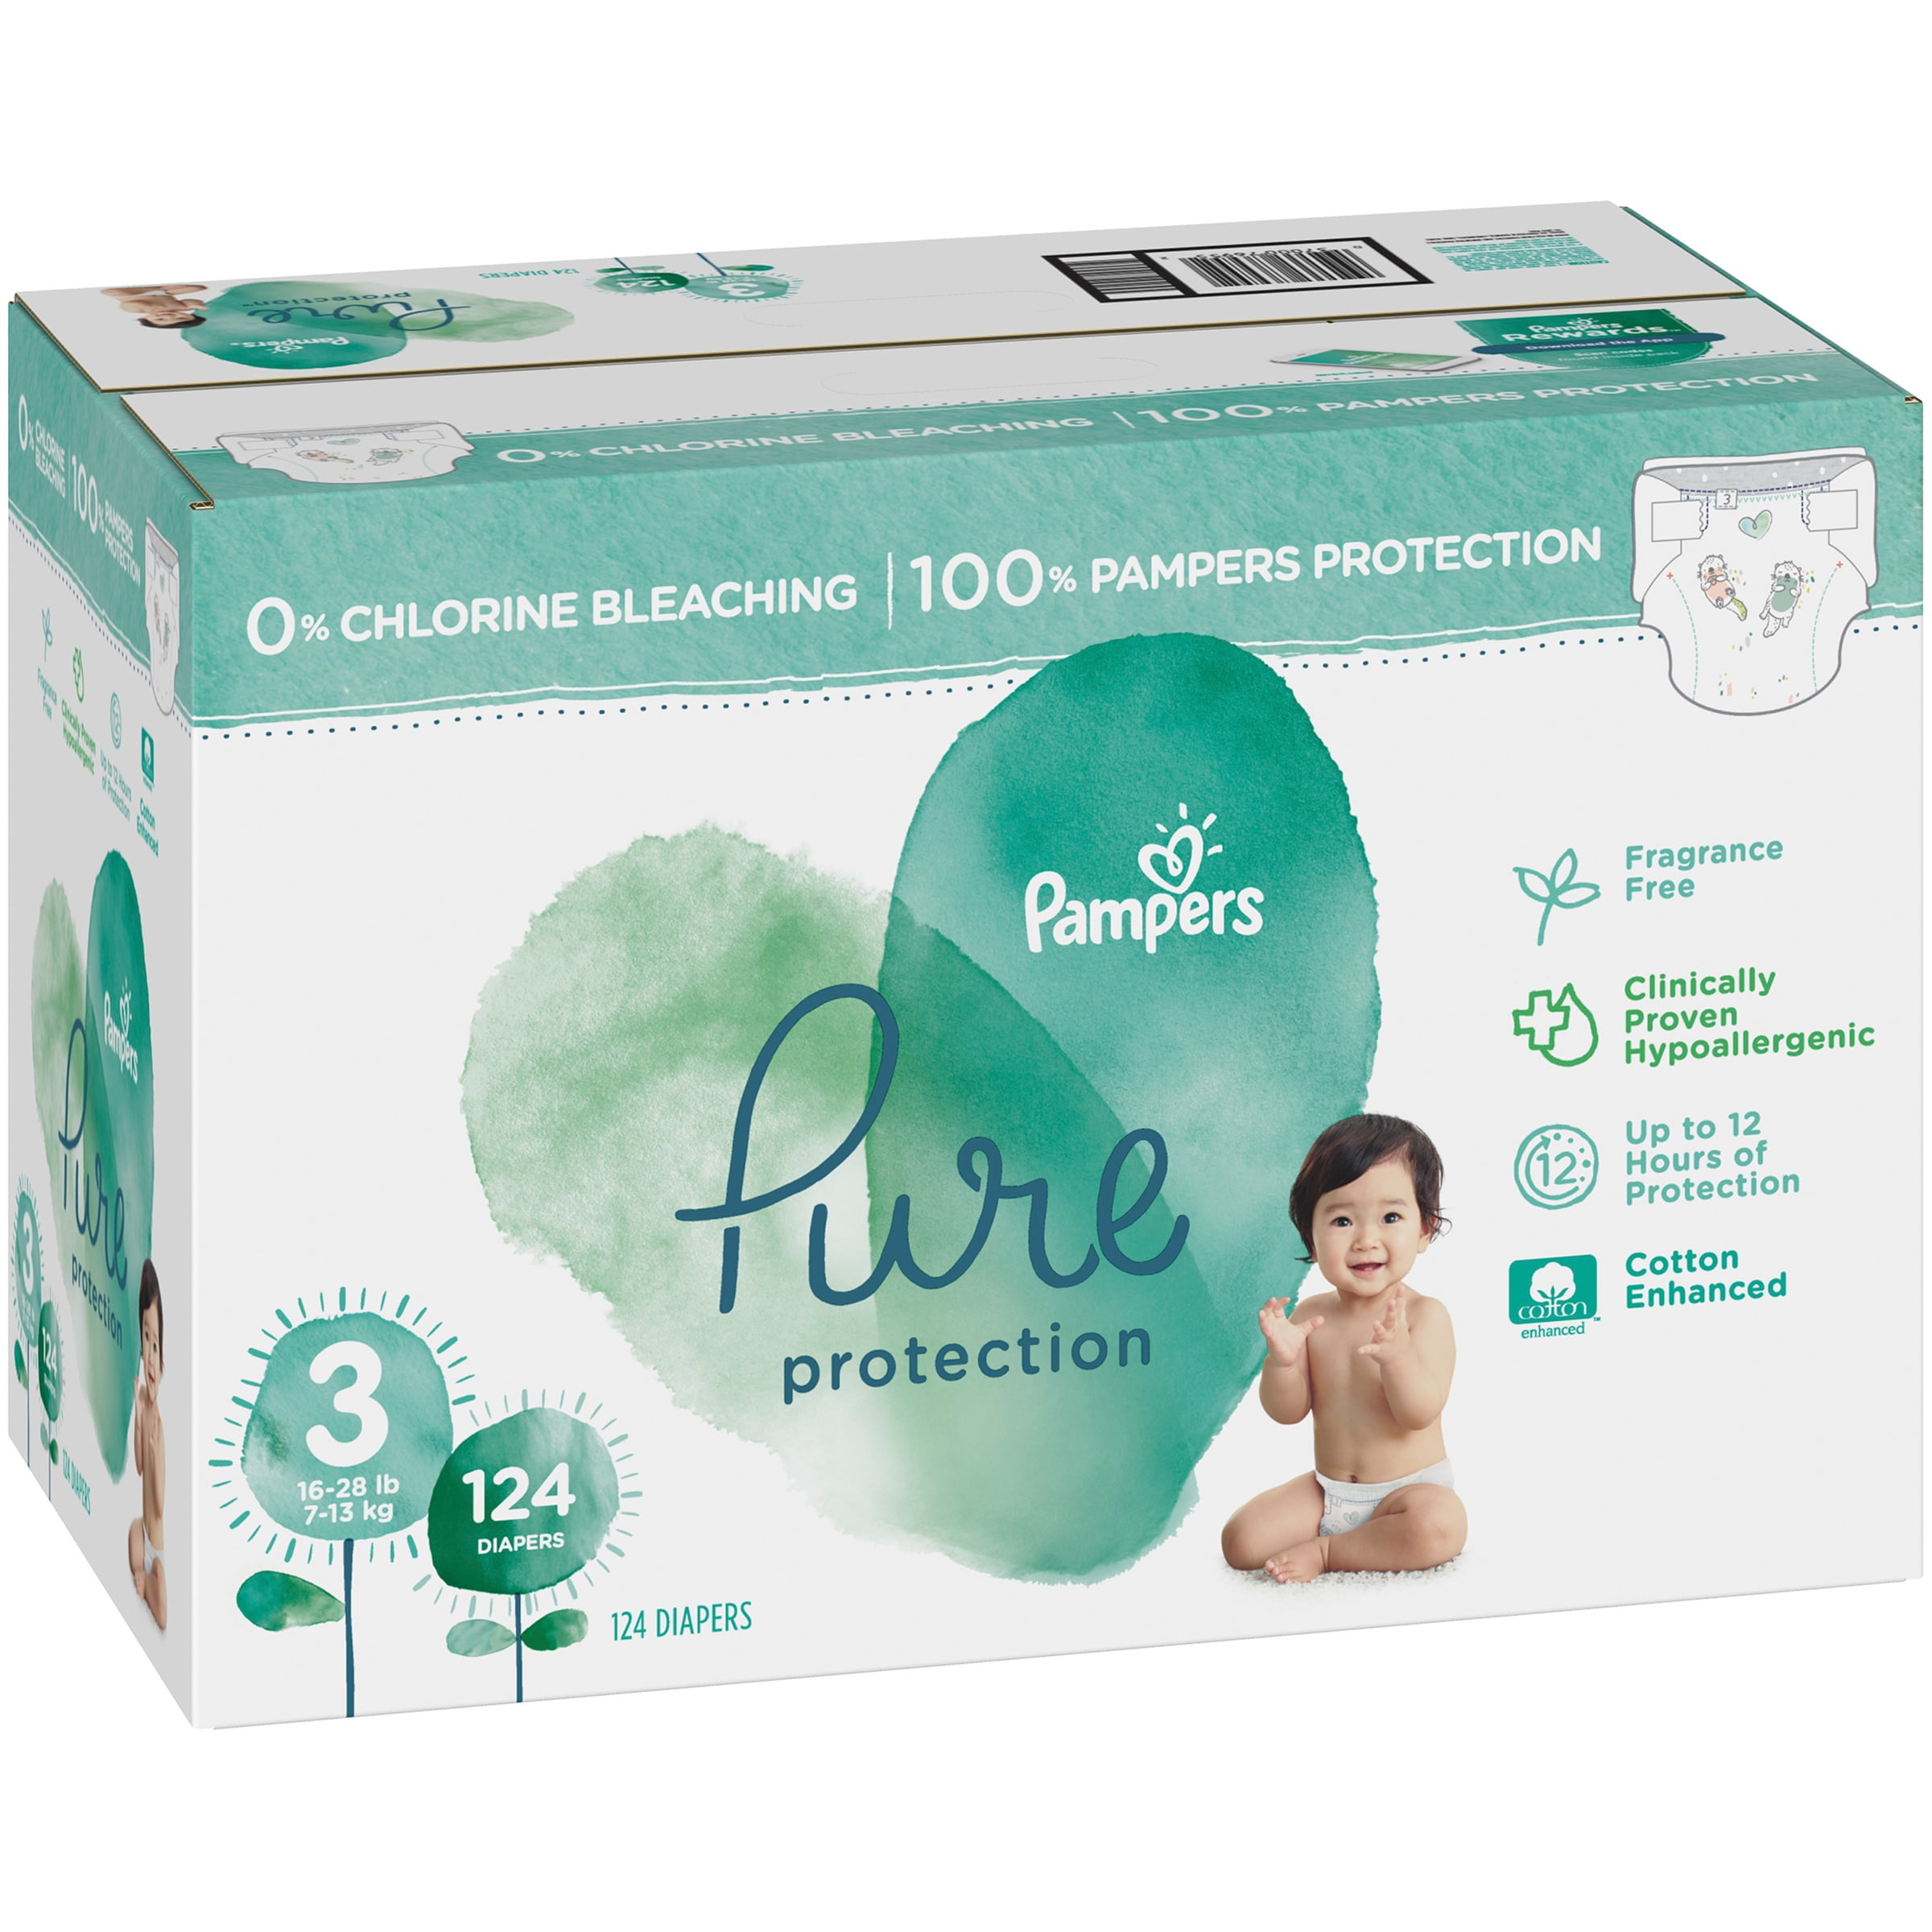 Meedogenloos Optimisme Bedankt Pampers Pure Protection Size 3 Diapers 124 ct Box - Walmart.com